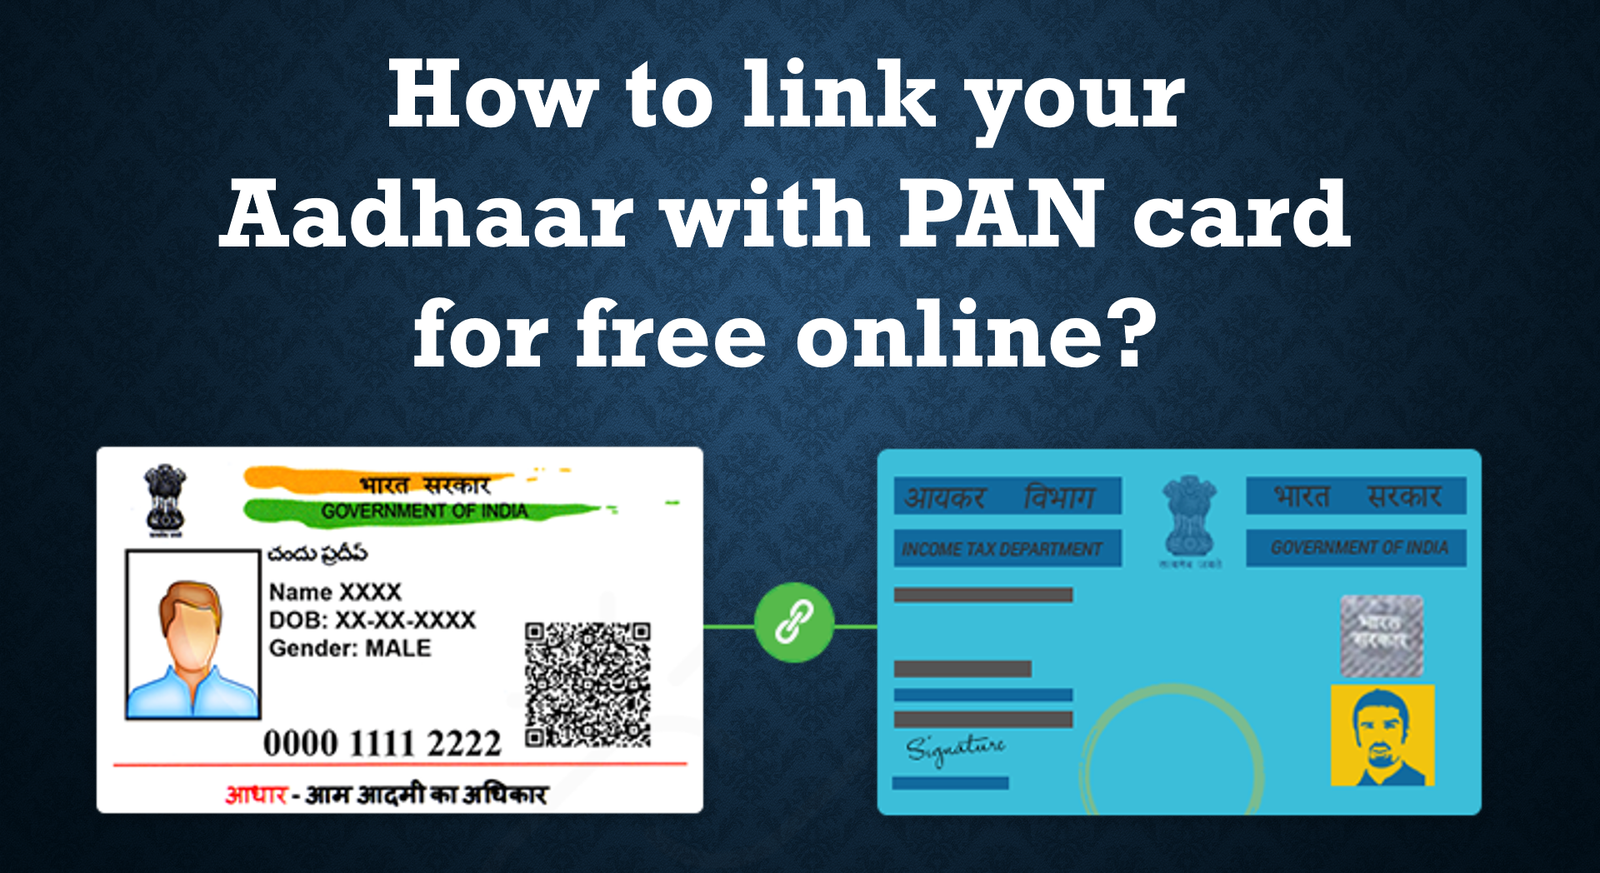 how to link your Aadhaar with PAN card for free online